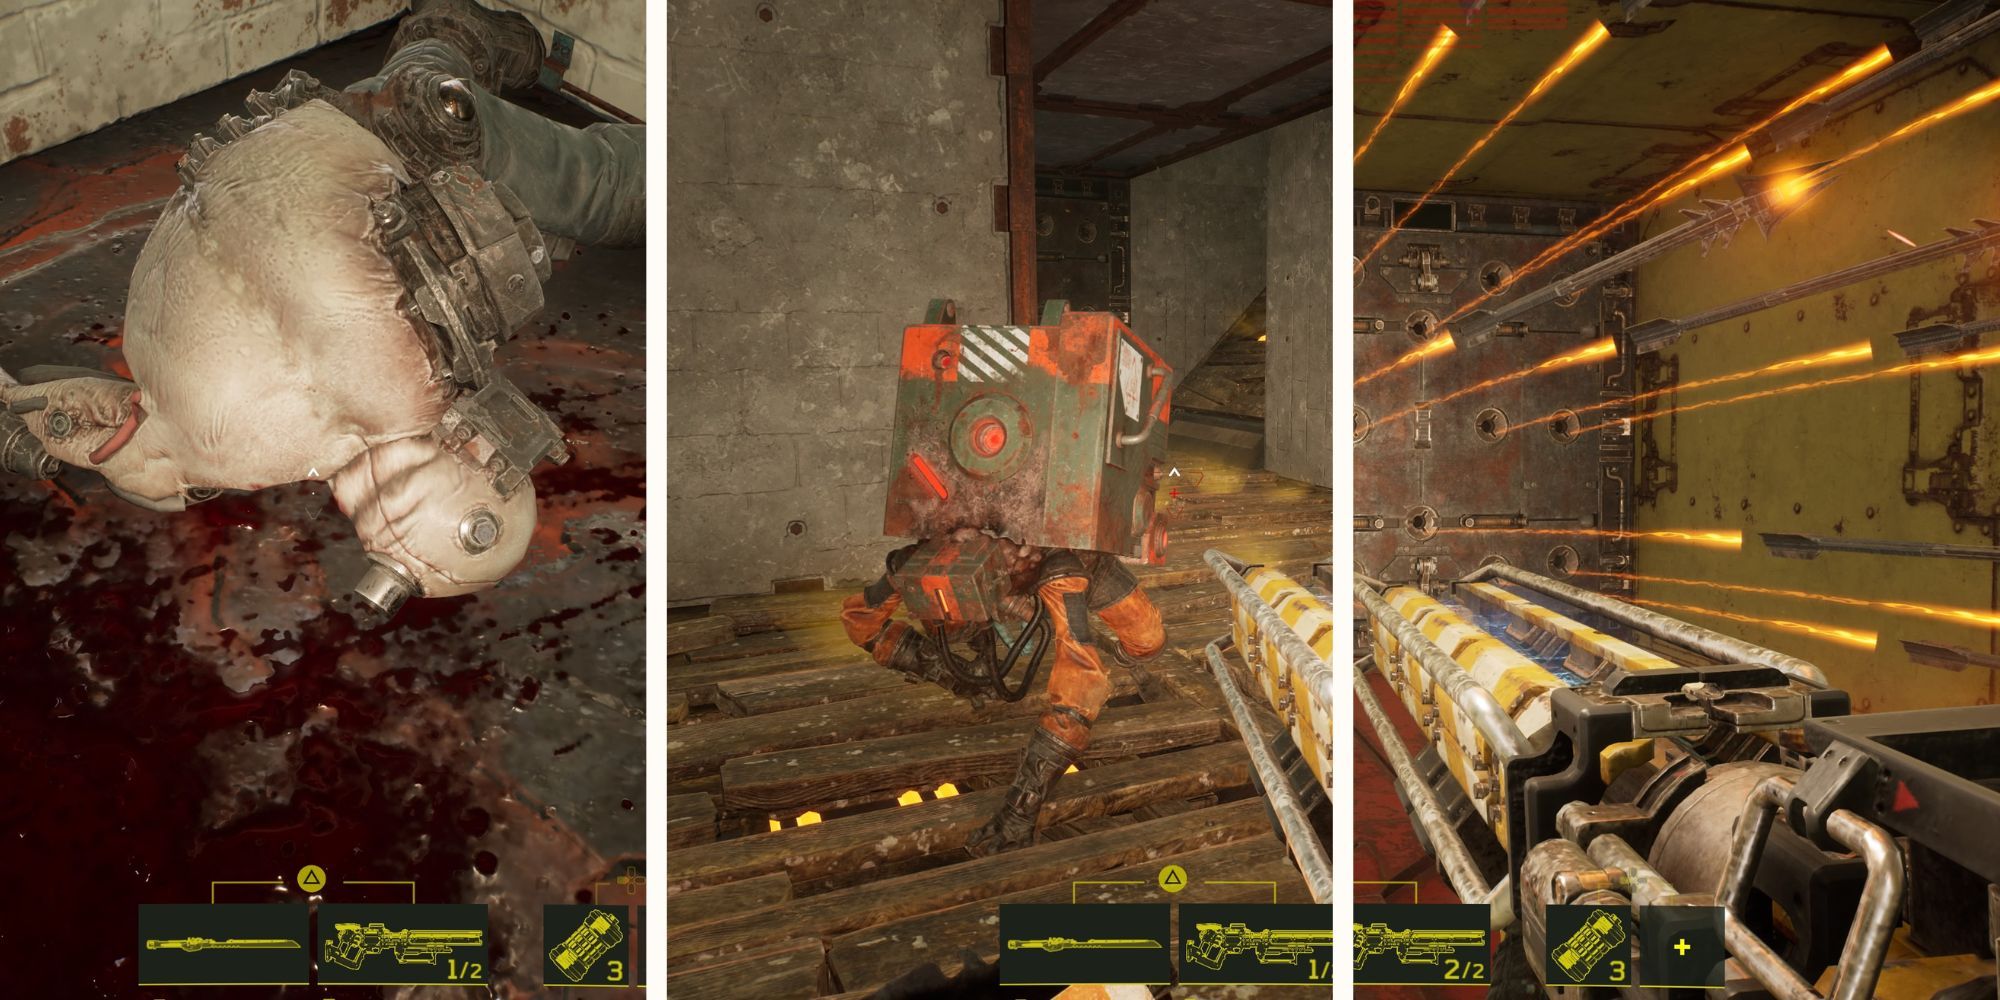 A collage featuring a fallen player, a robot, and a trap shooting fire.